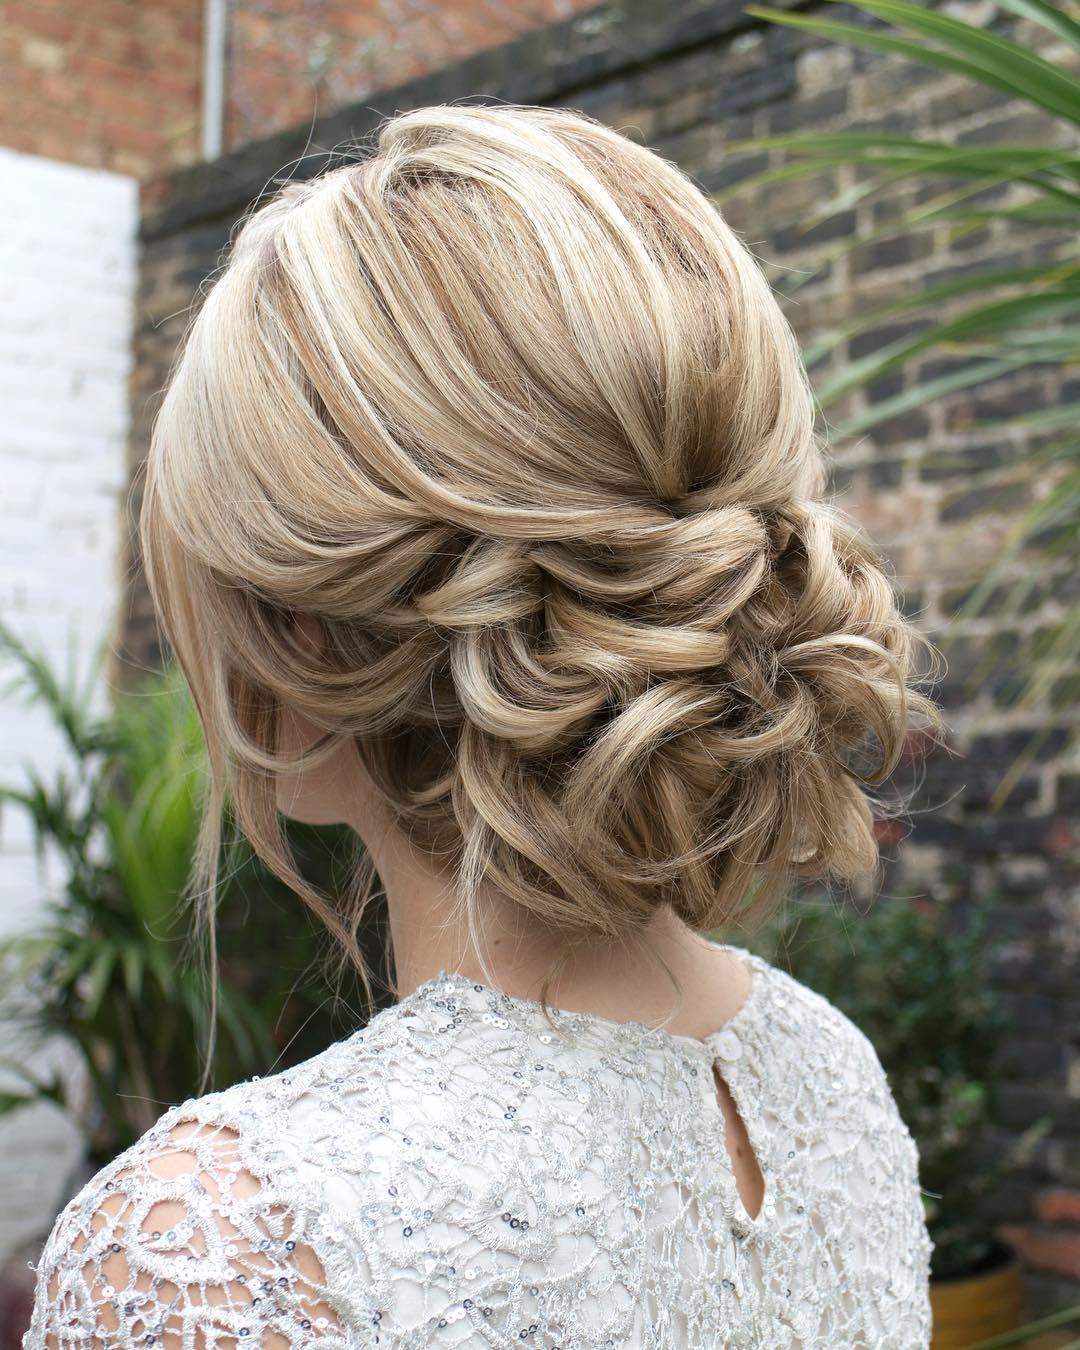 Updo Prom Hairstyles
 10 Gorgeous Prom Updos for Long Hair Prom Updo Hairstyles